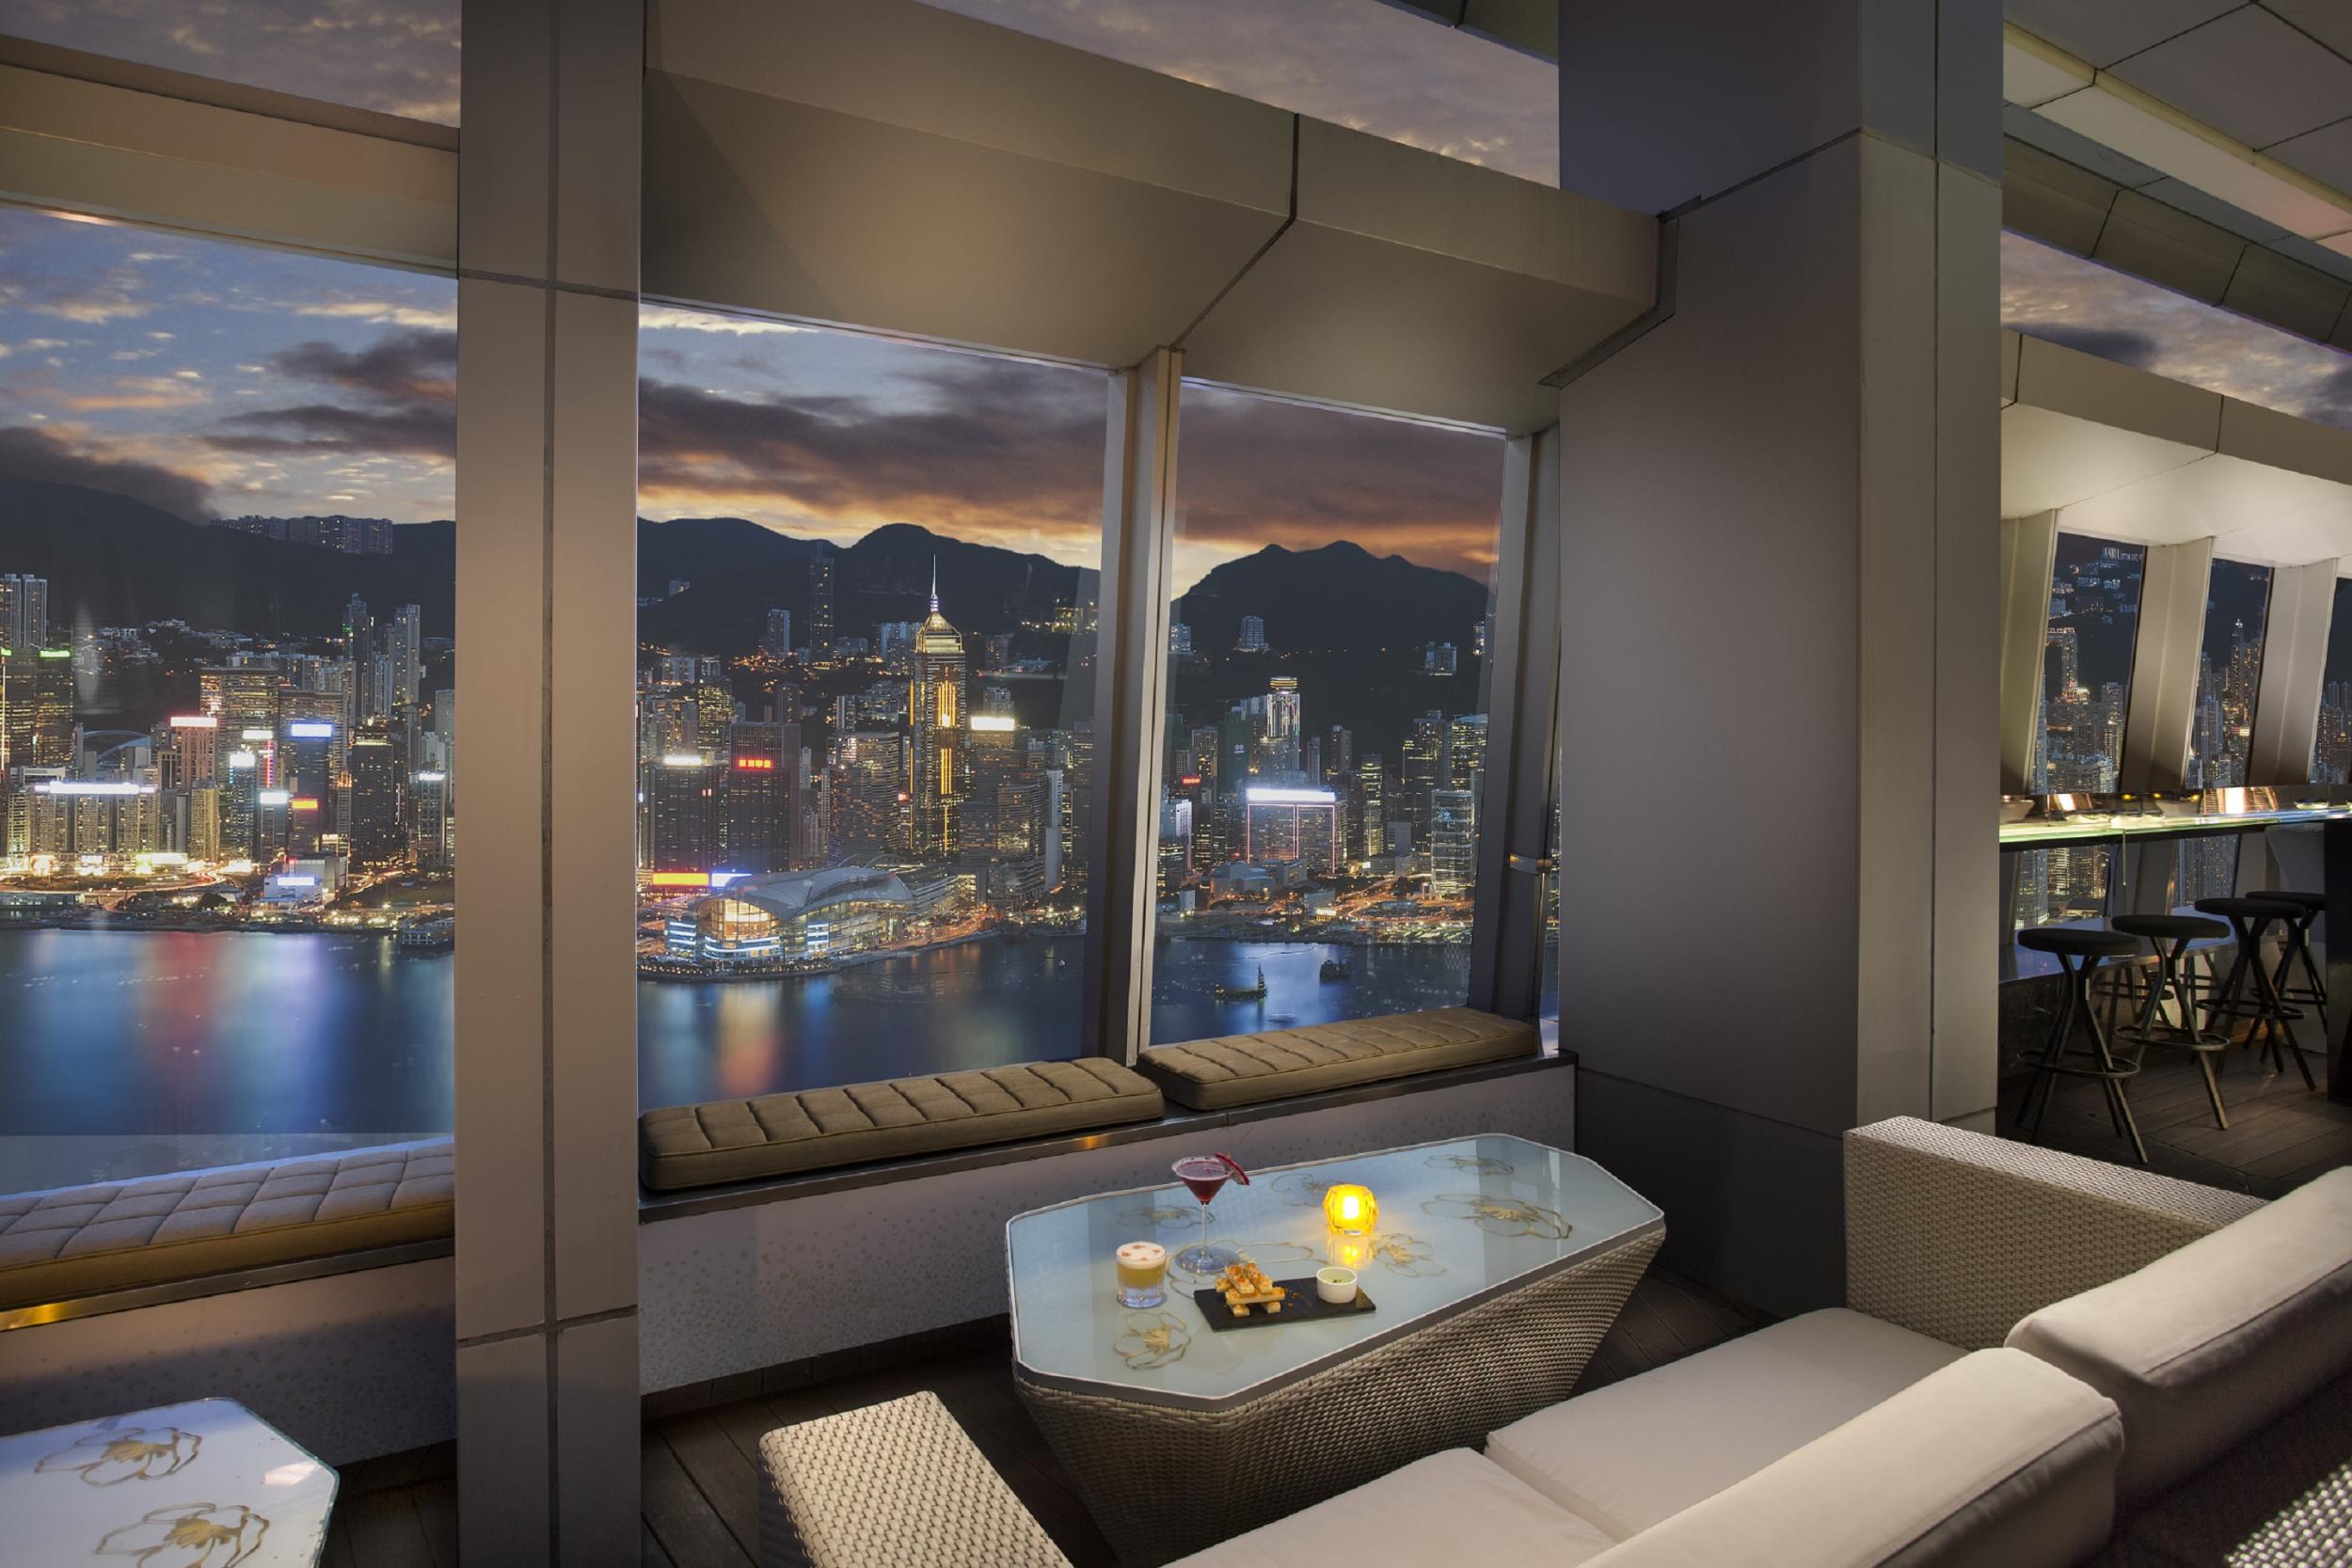 Some of the best views in Hong Kong await at the Ritz-Carlton's Ozone bar